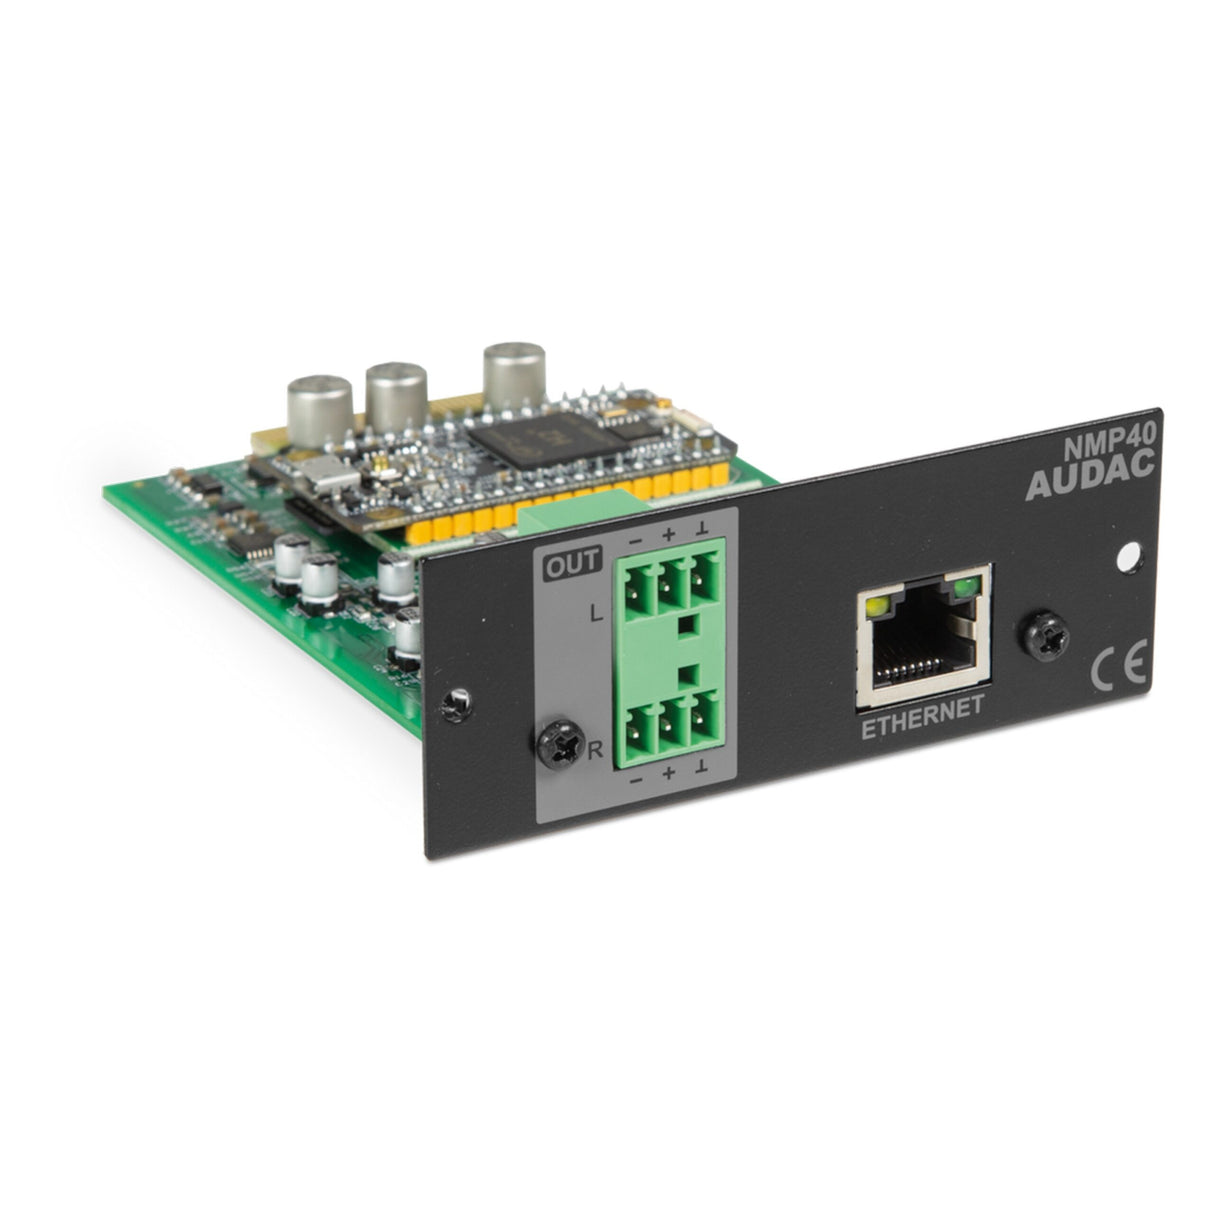 Audac NMP40 Audio Streaming SourceCon Module